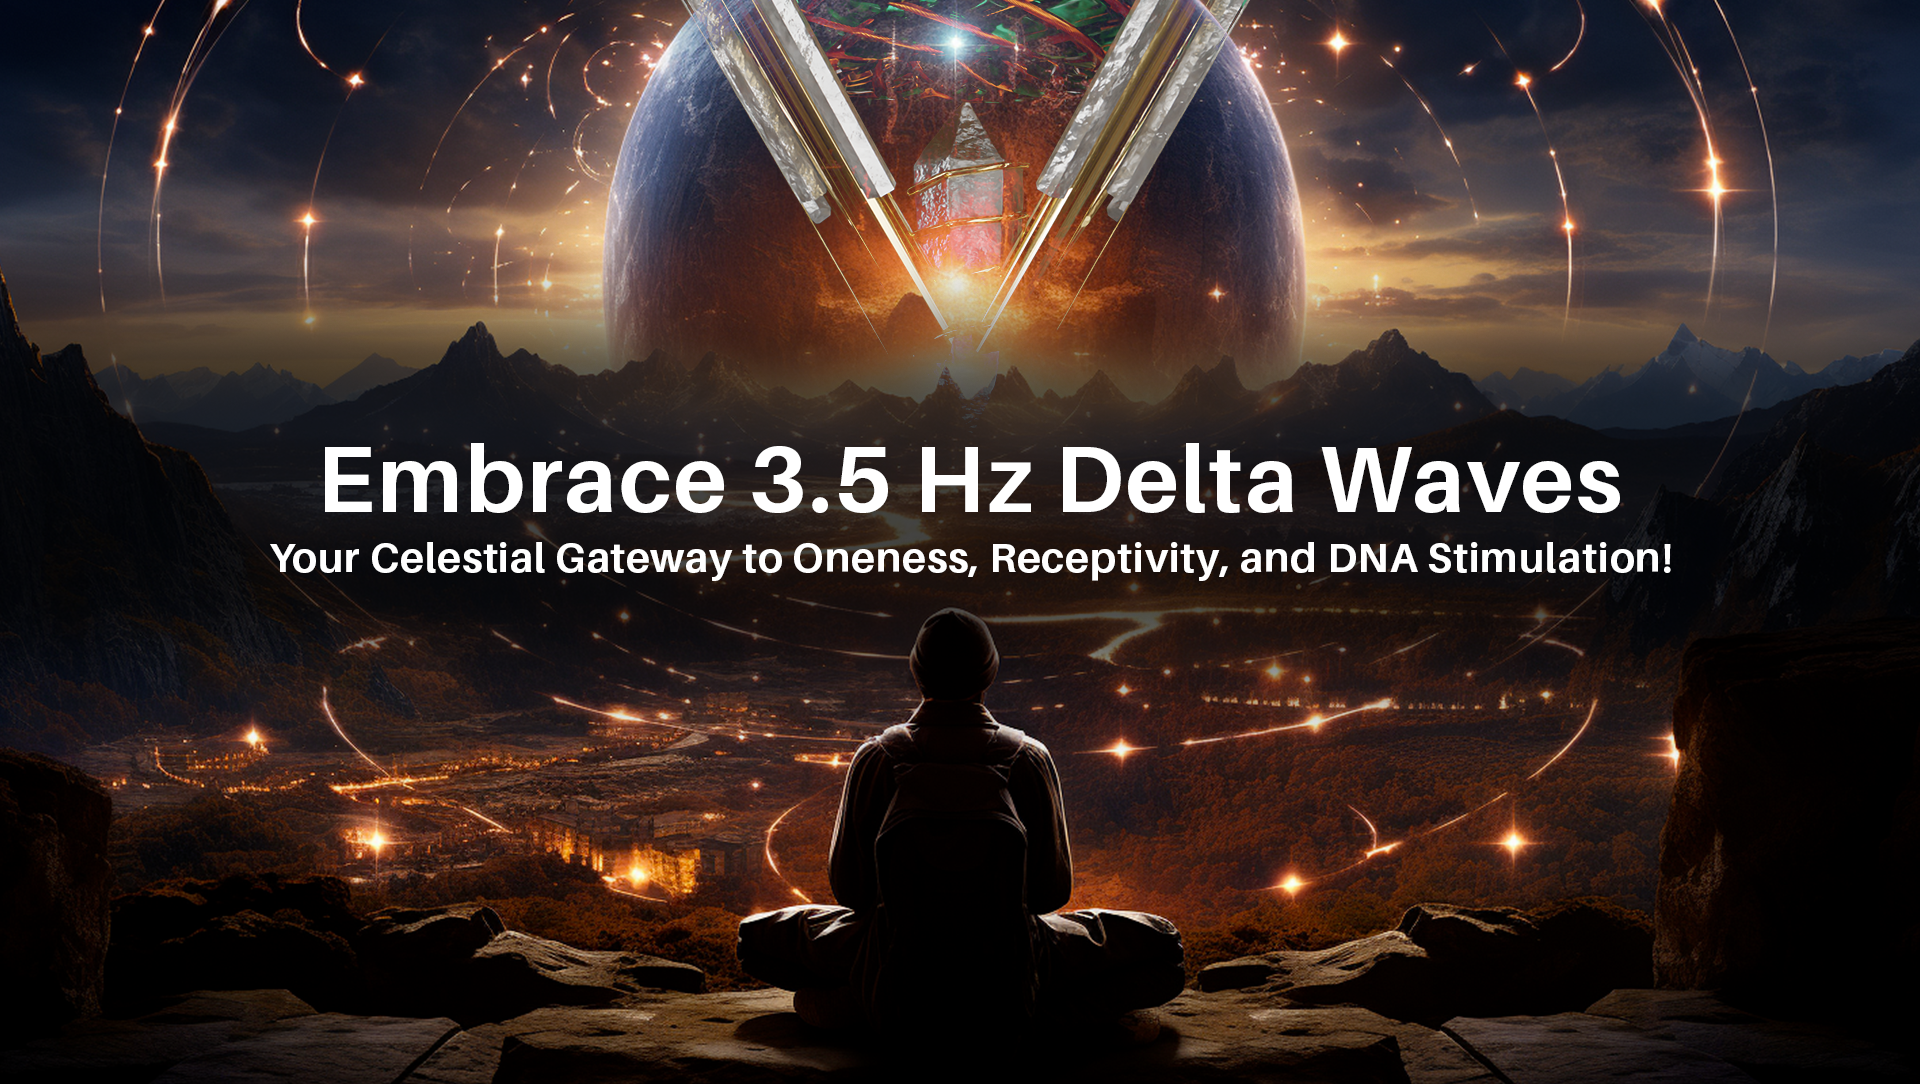 Embrace 3.5 Hz Delta Waves – Your Celestial Gateway to Oneness, Receptivity, and DNA Stimulation!